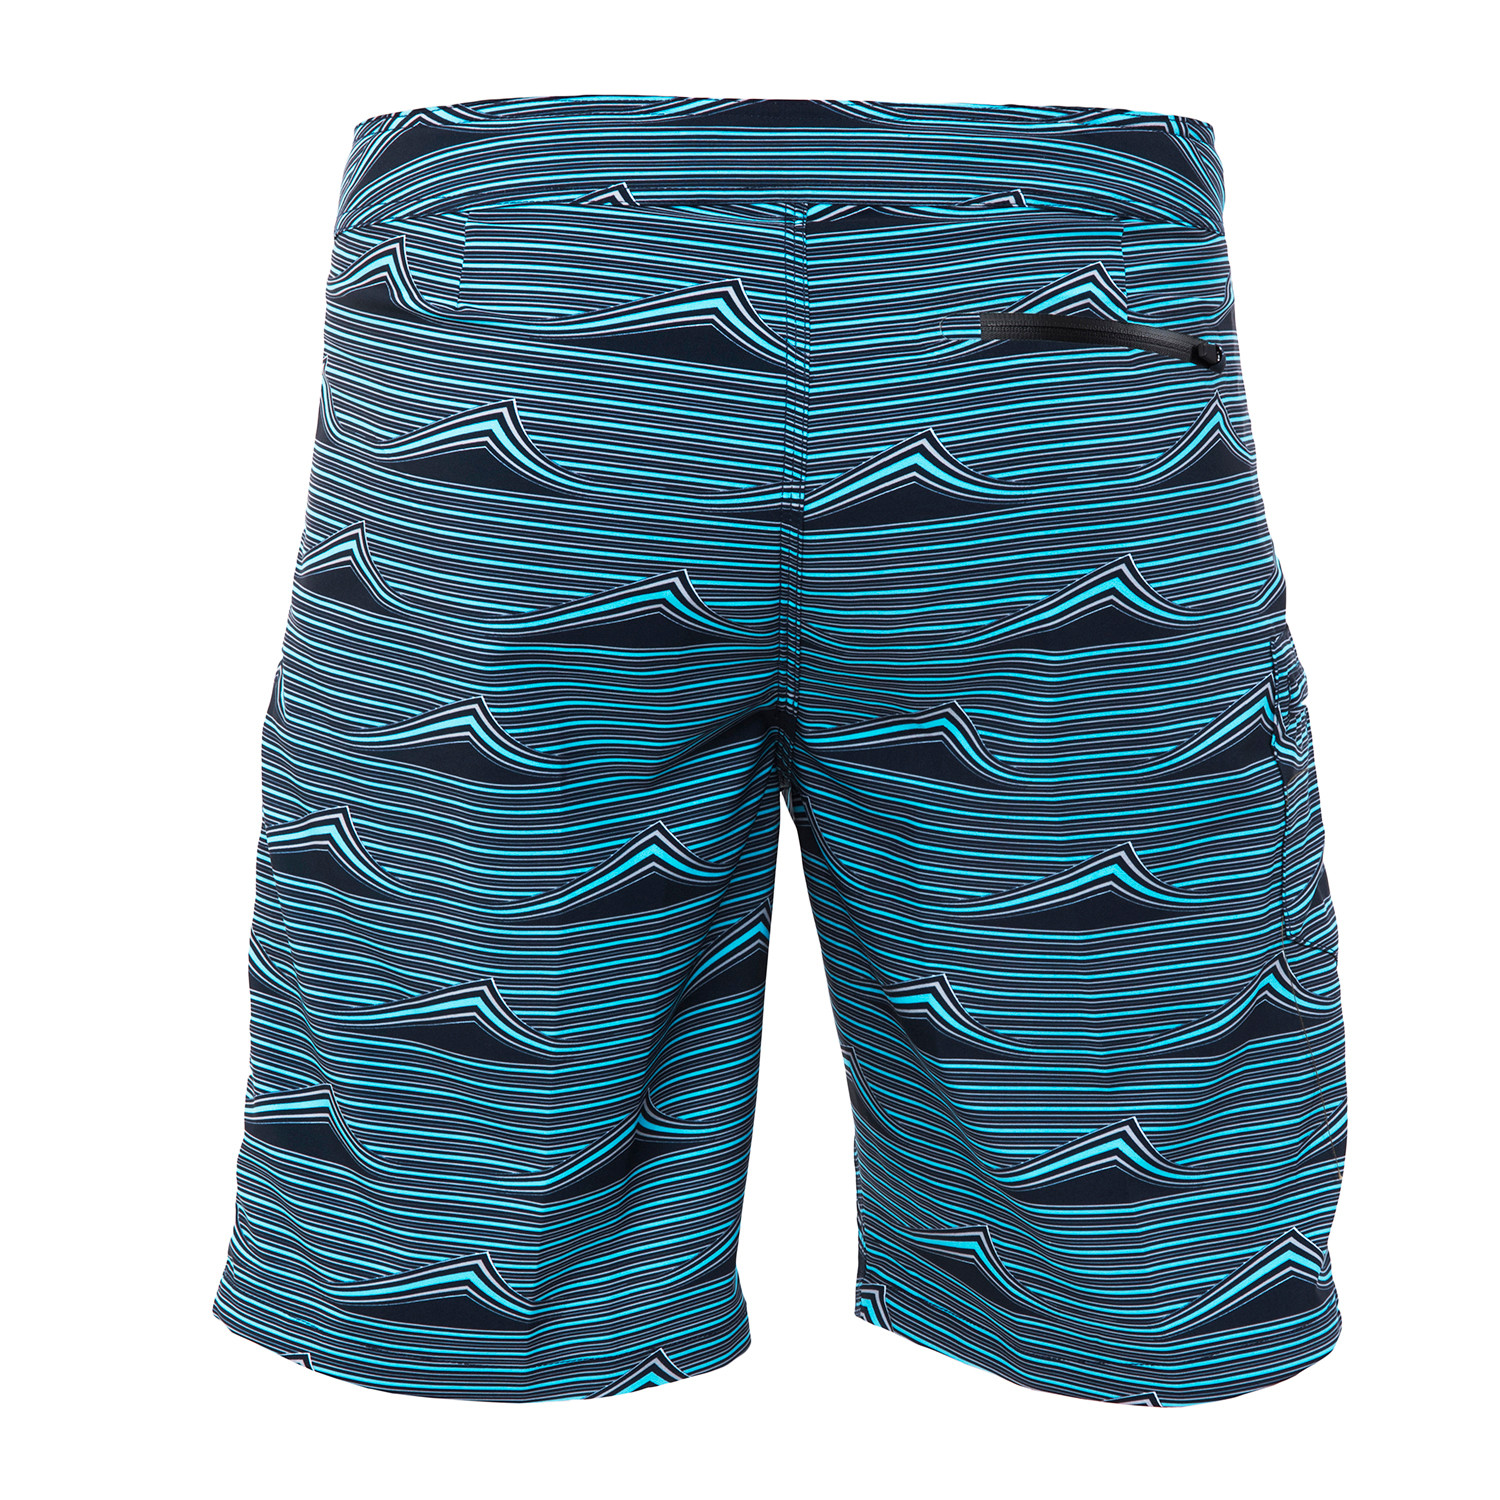 Performo Wave Boardshort // Navy (34) - Laird Apparel - Touch of Modern